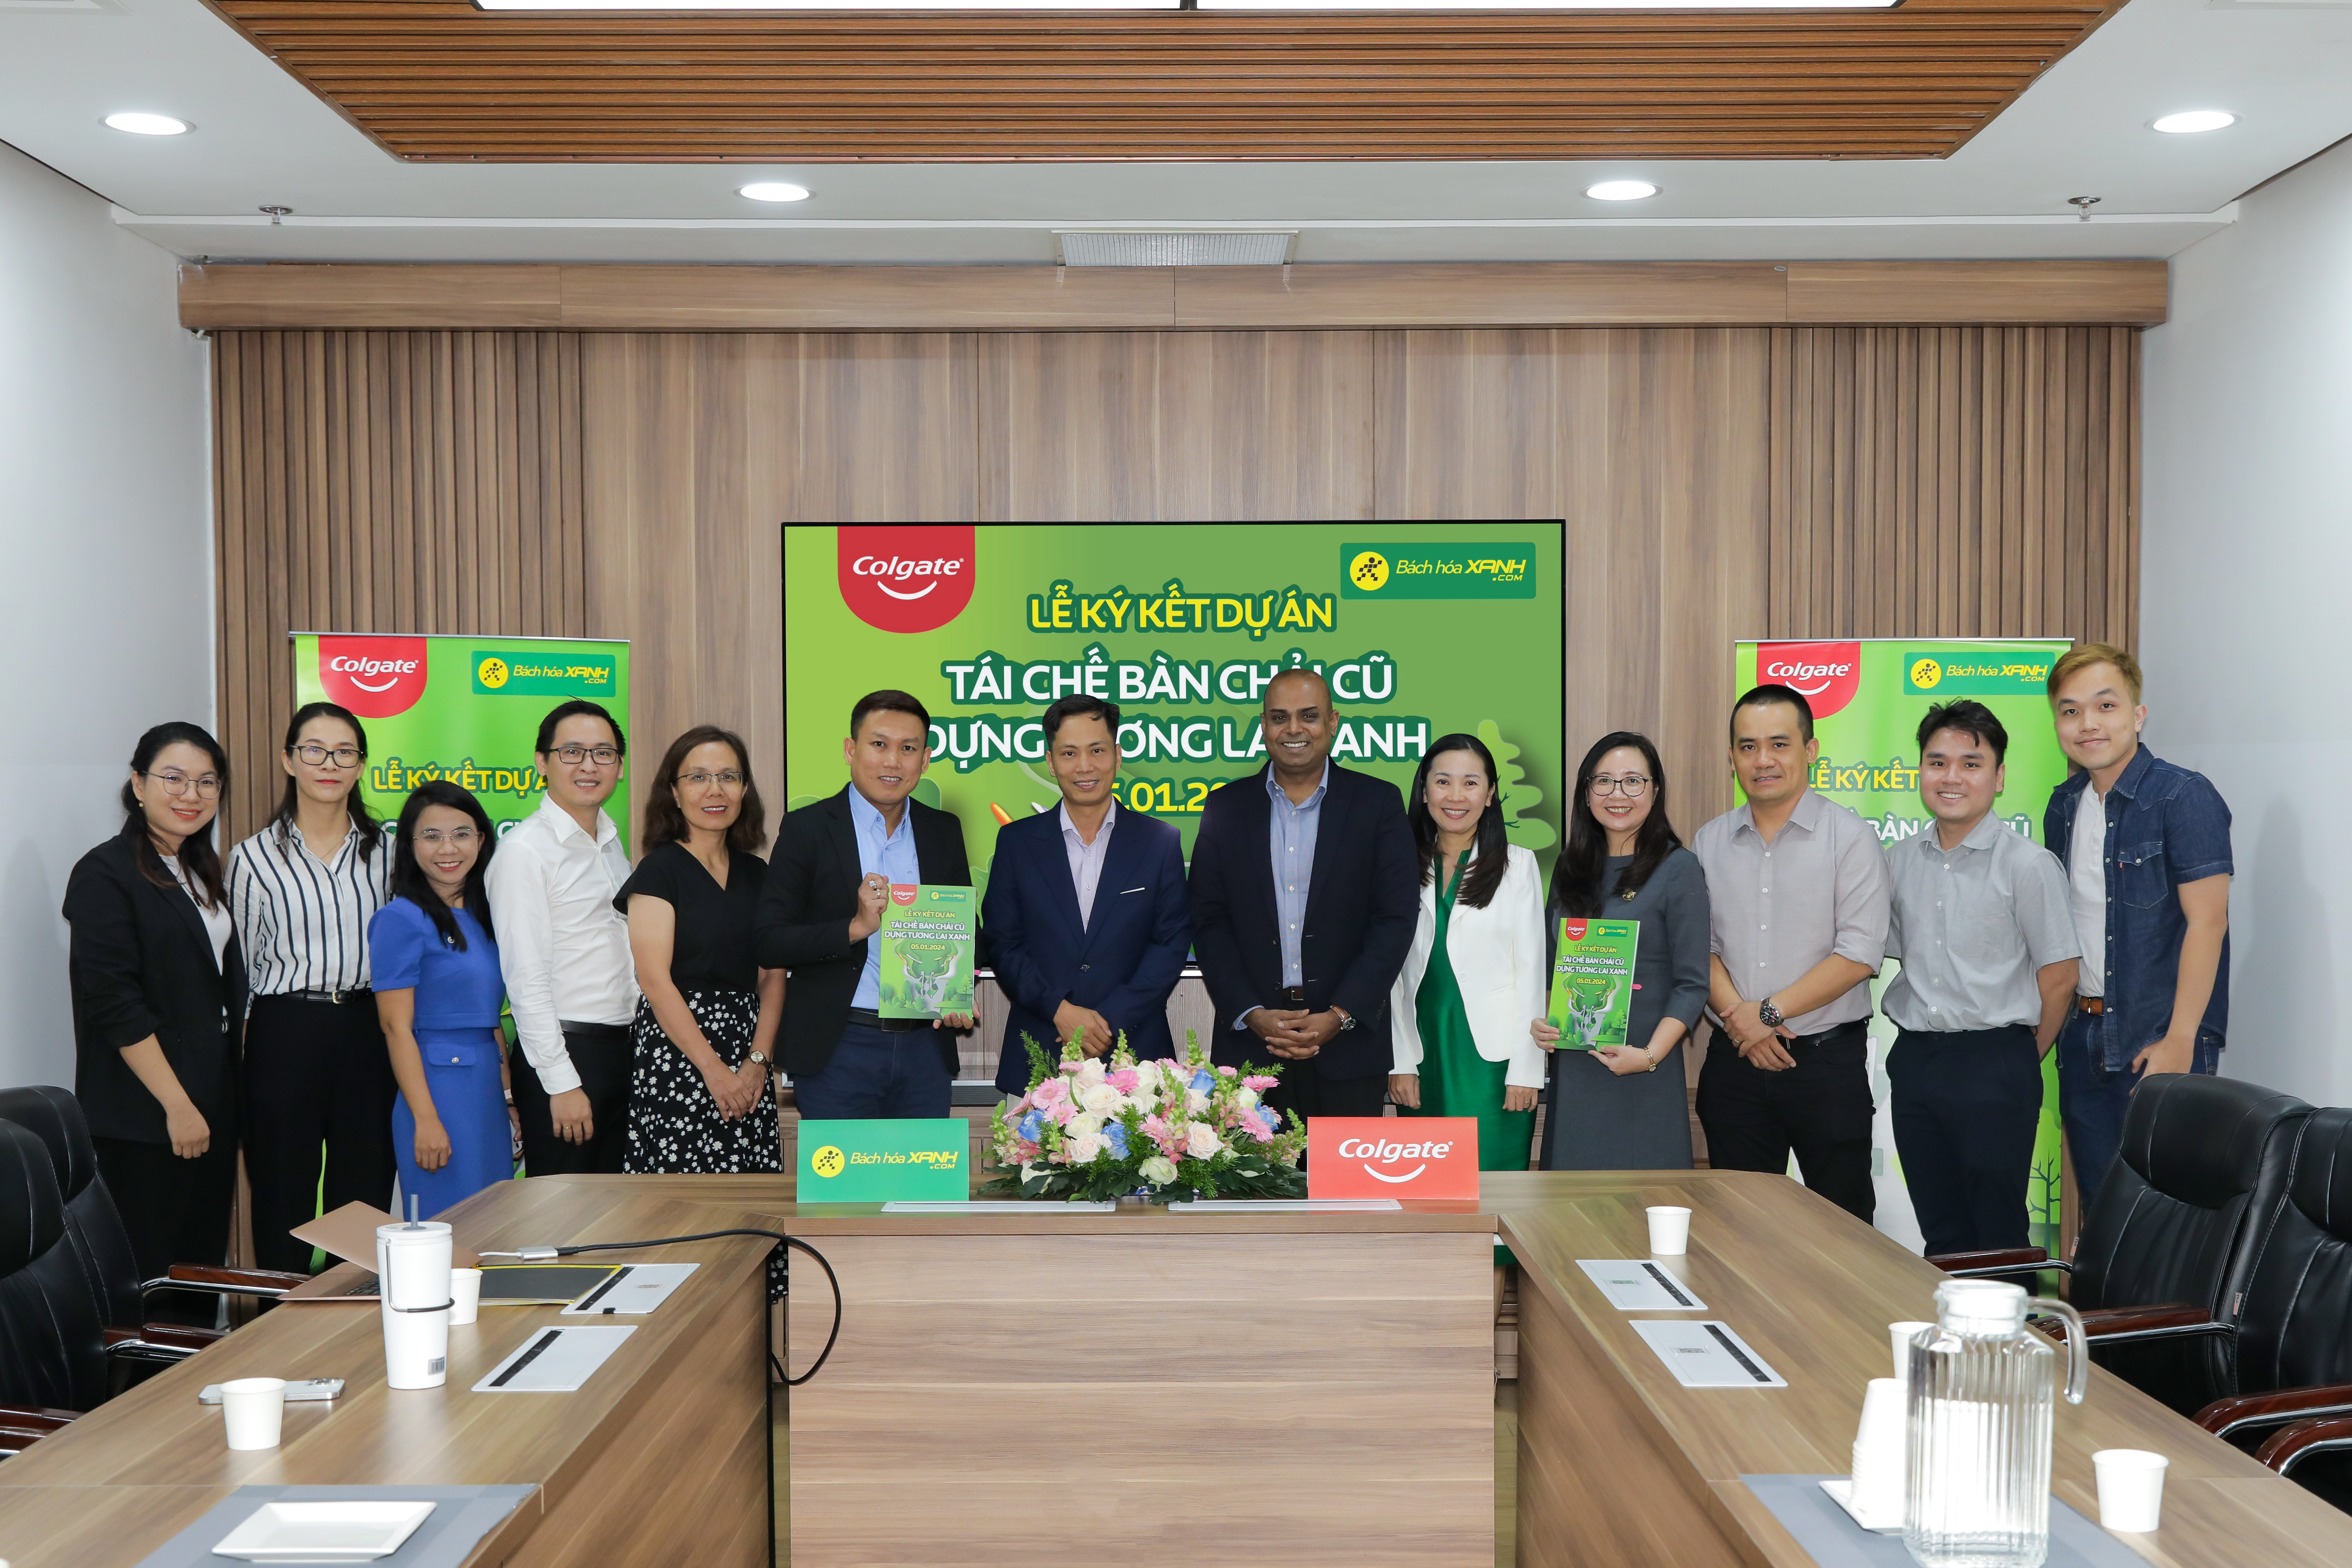 Bach Hoa Xanh collaborates with Colgate VN on a collection and recycling project for used toothbrushes to protect the environment and promote a circular economy.